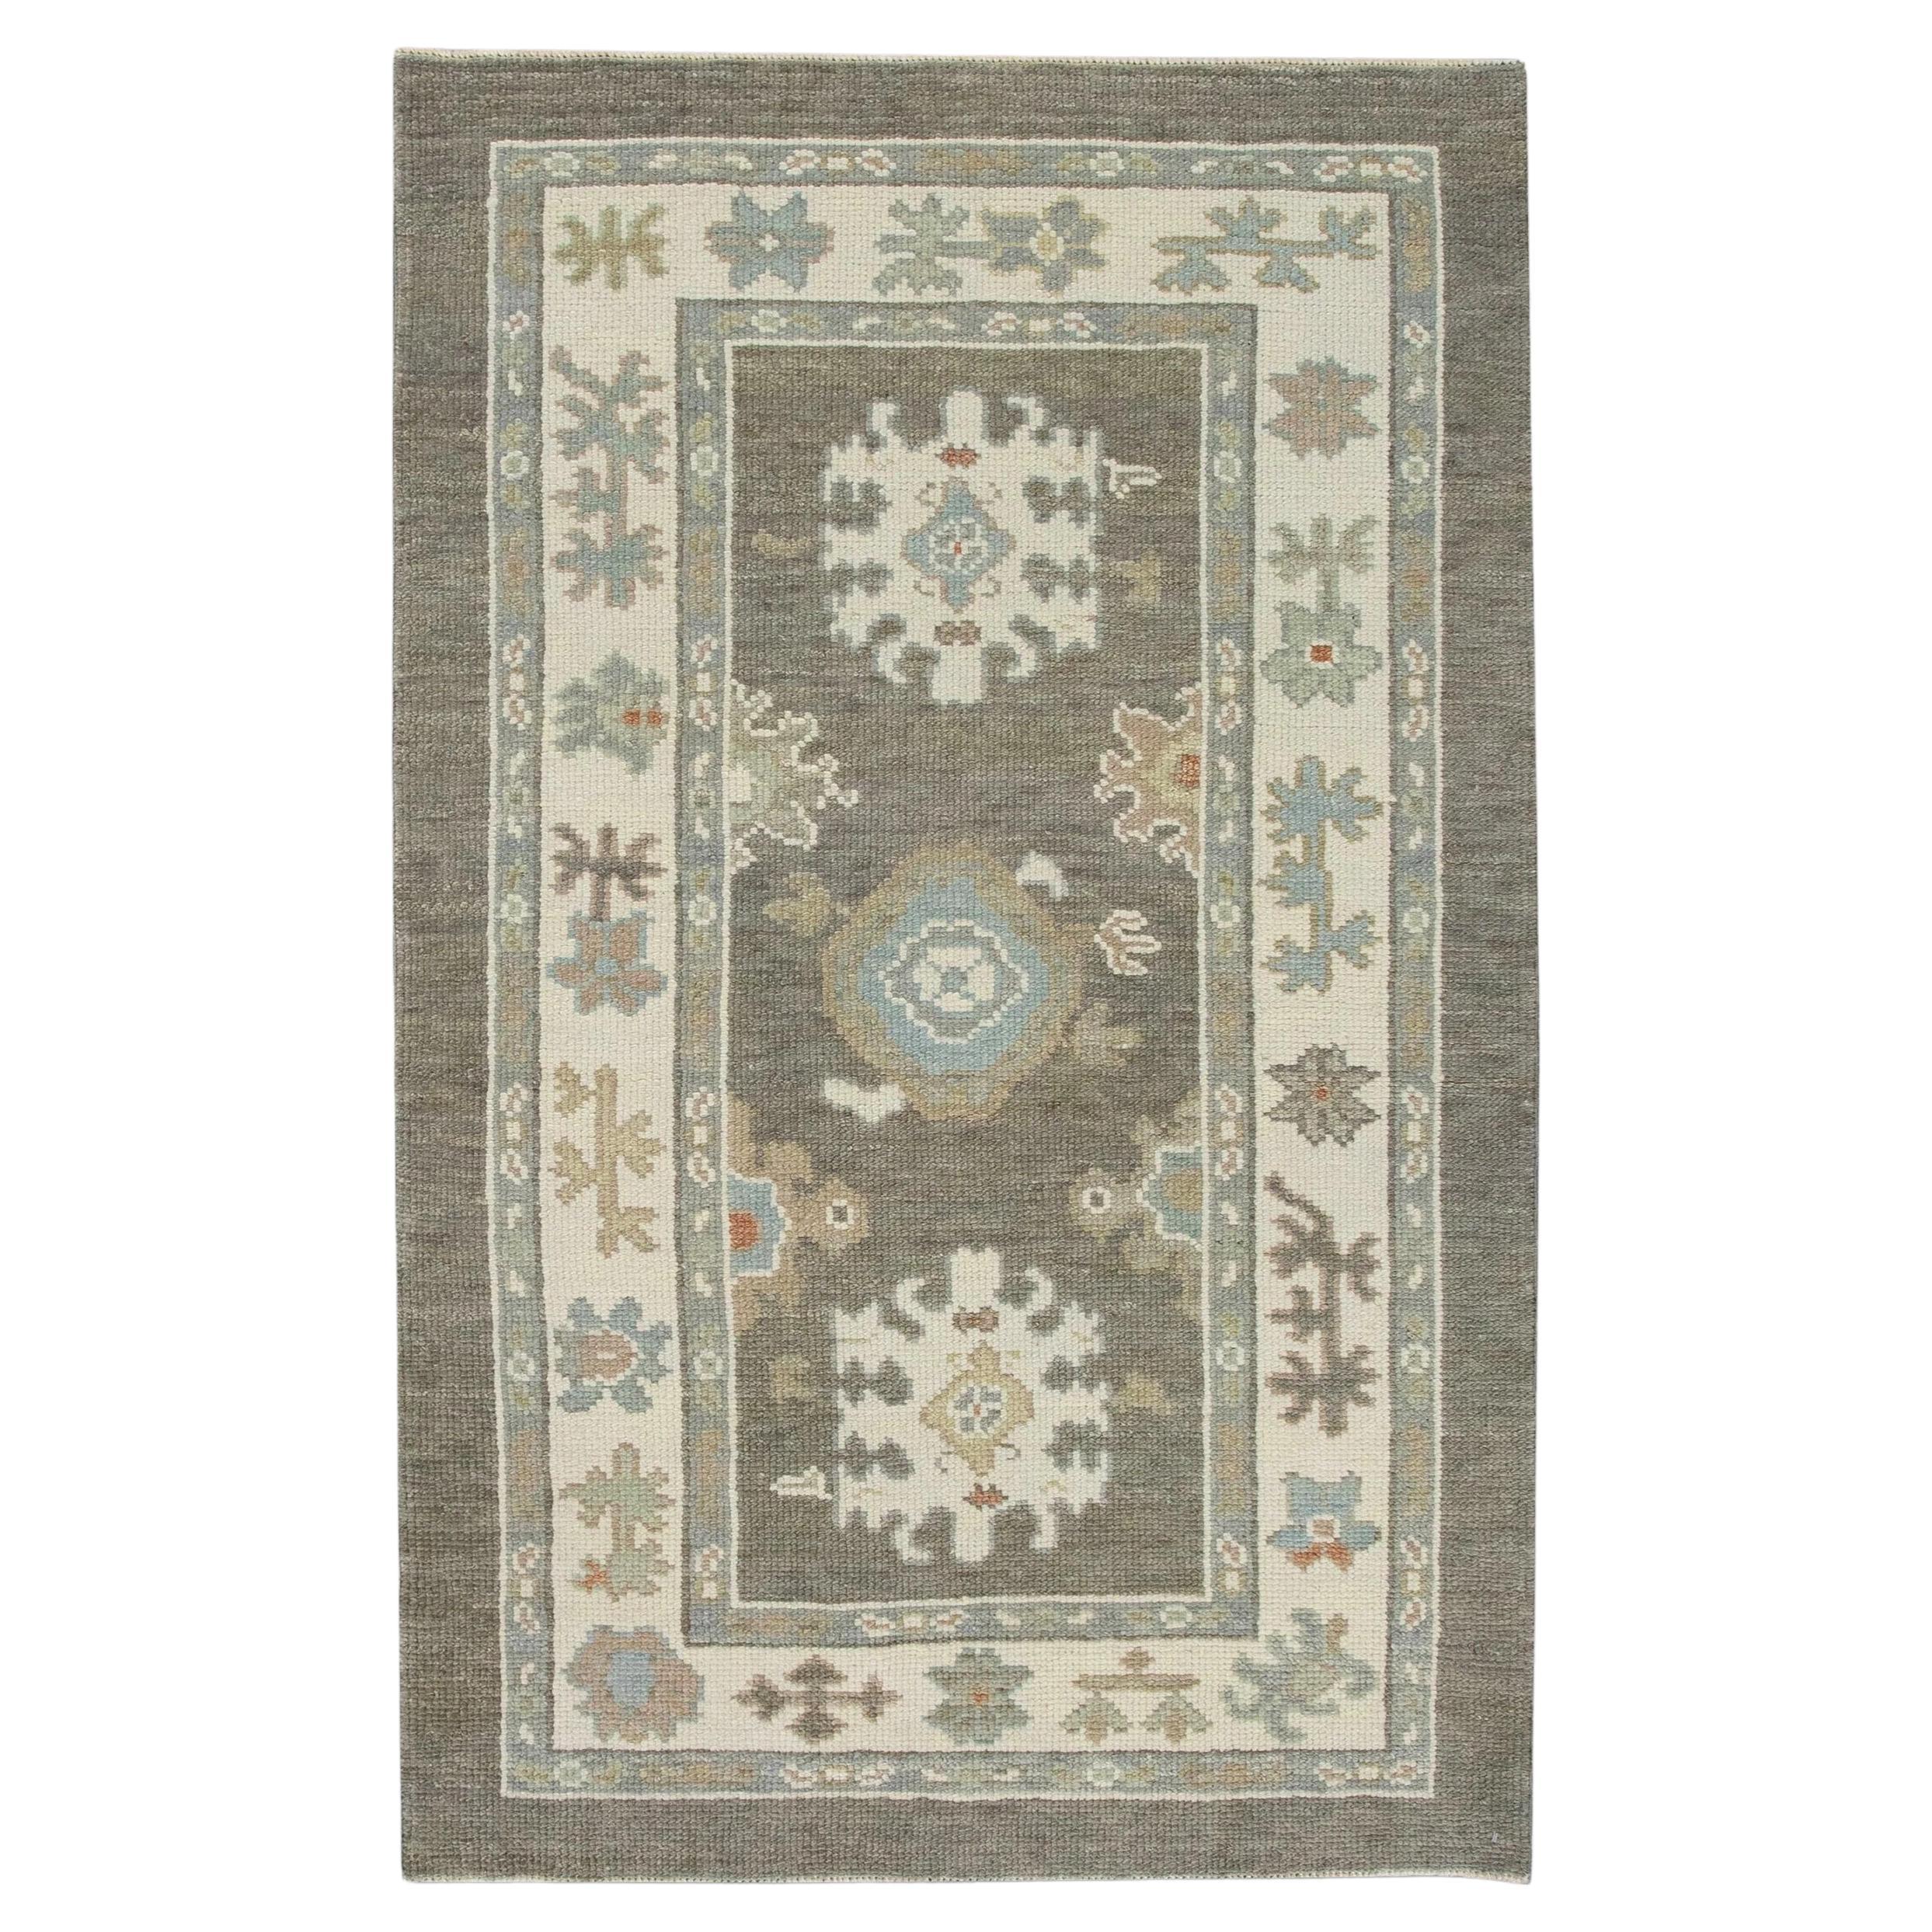 Olive Green Floral Handwoven Wool Turkish Oushak Rug 3' x 5'4"